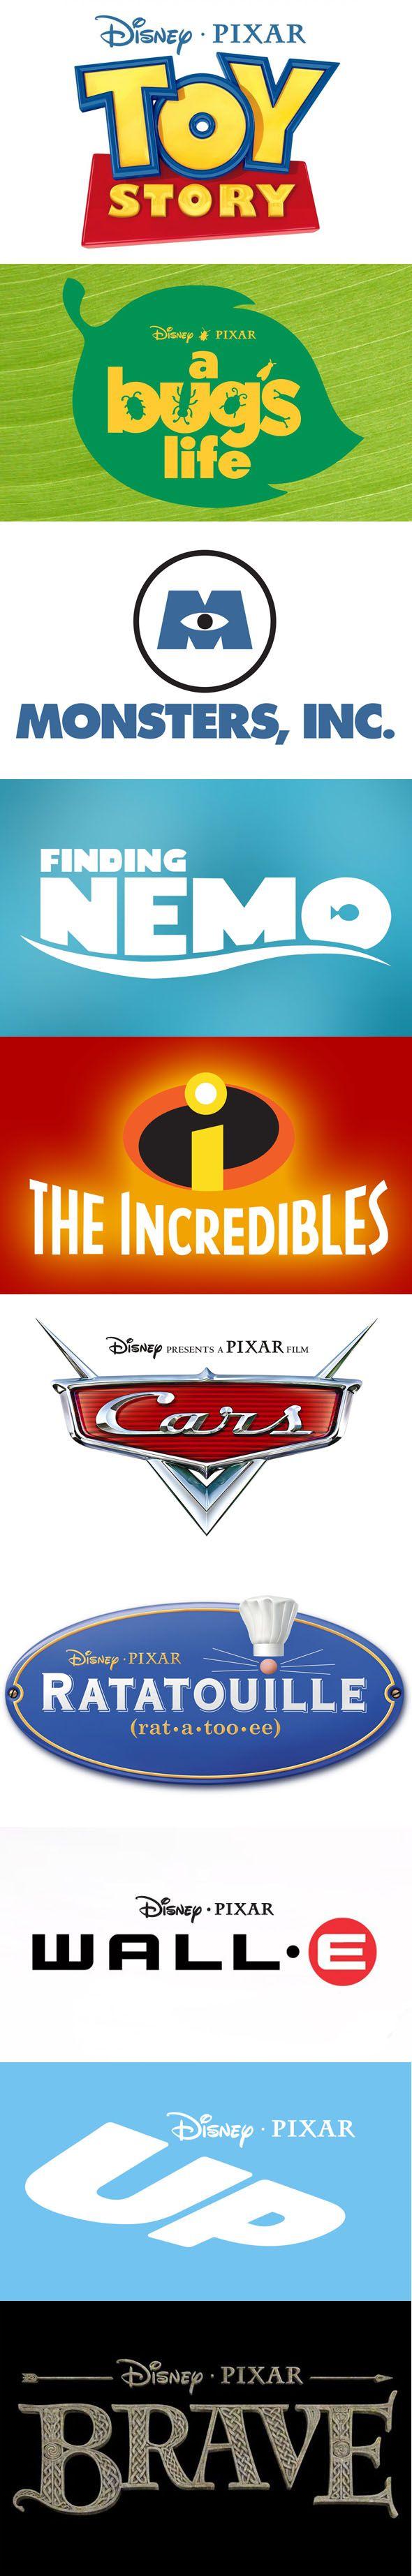 Disney Pixar Movie Logo - Pixar Logos | Just Because You Have a Fast Pass...Doesn't Mean You ...